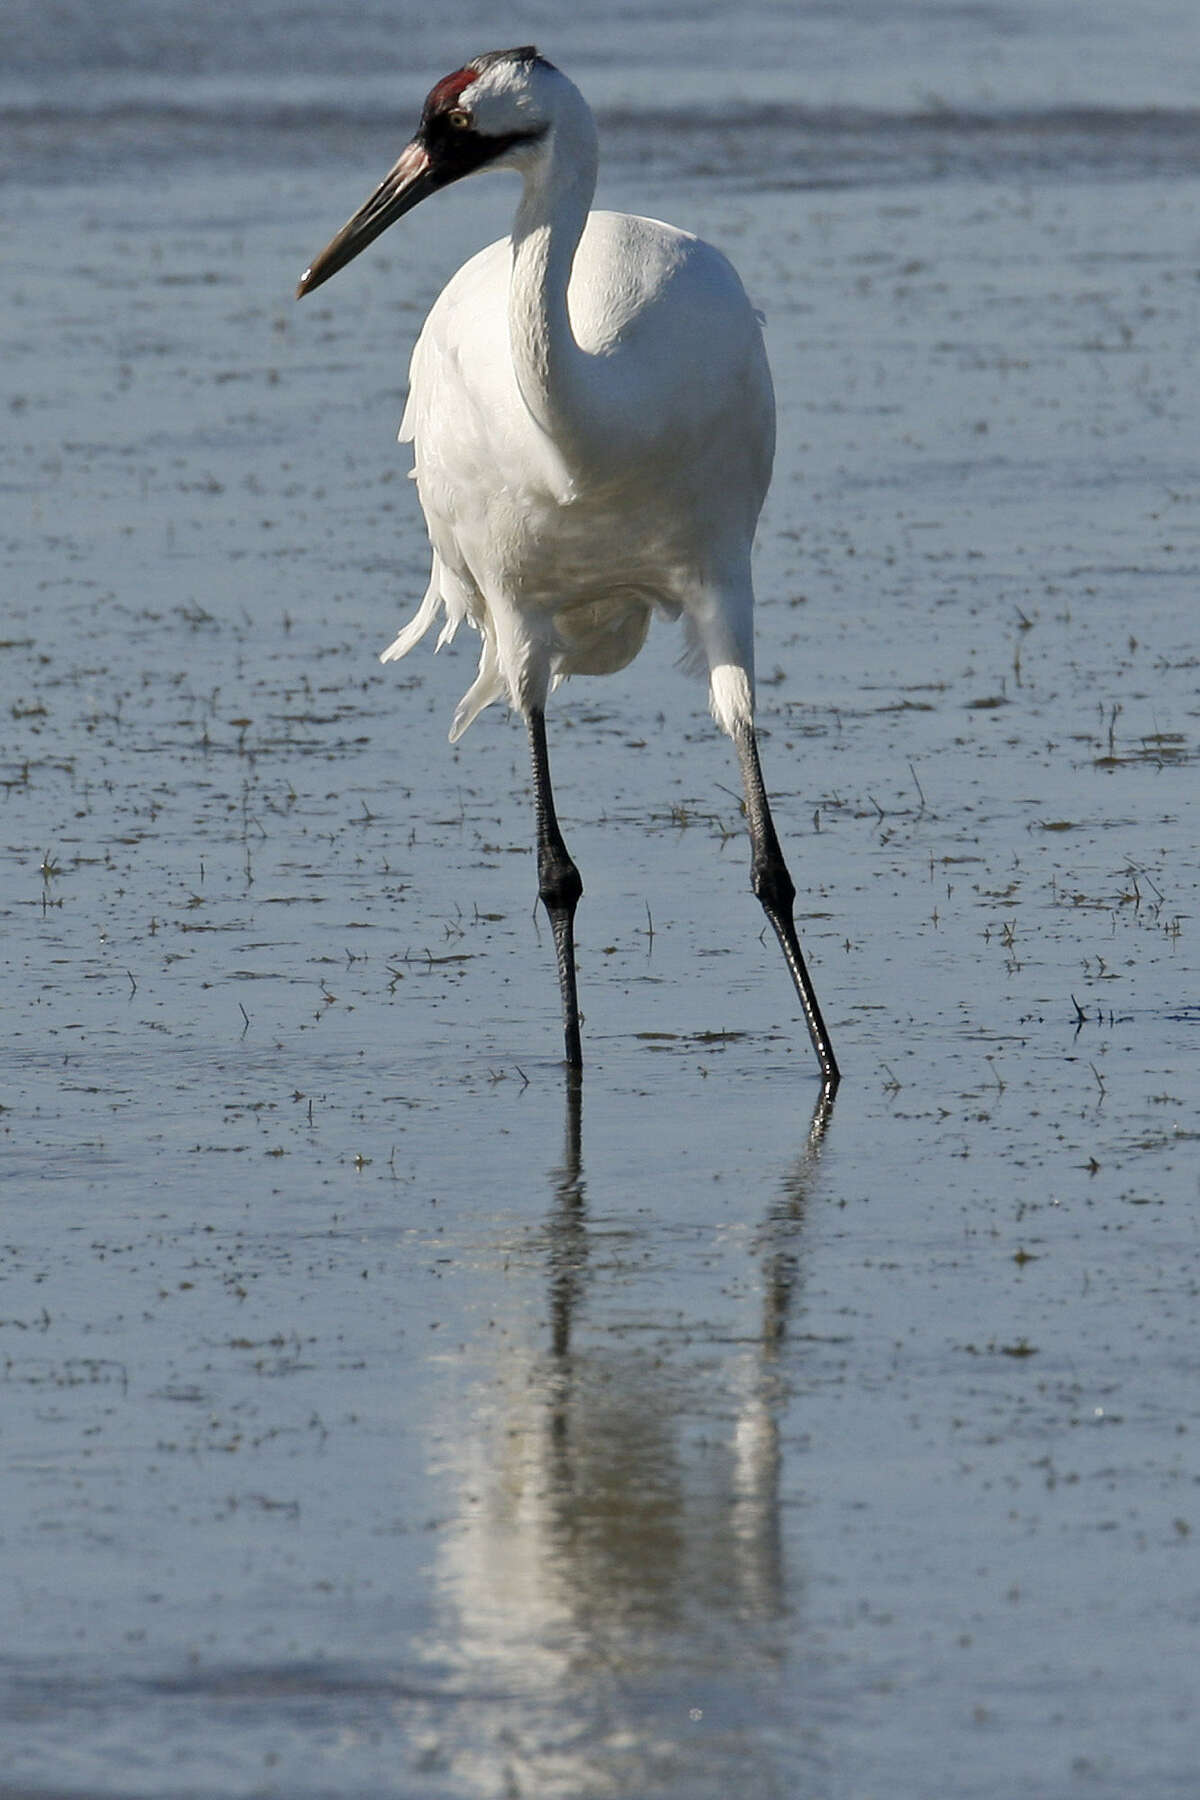 The ongoing drought has caused a decline in blue crabs. The crabs are the main food for the whooping cranes.